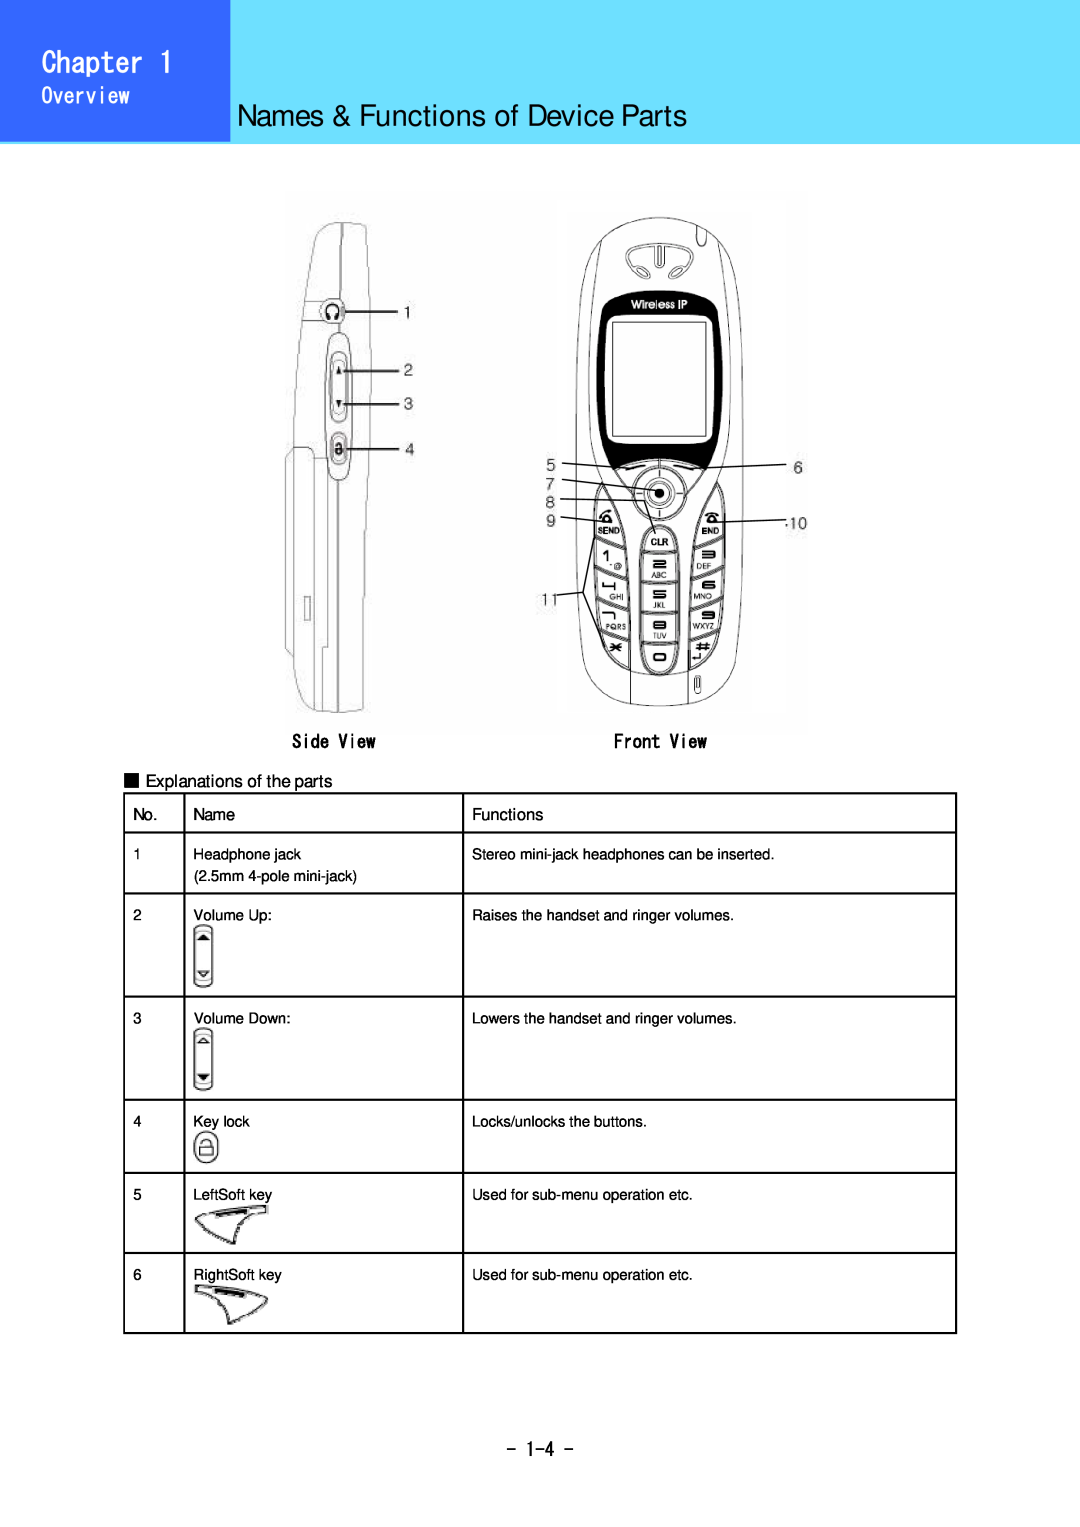 Hitachi 5000 user manual Names & Functions of Device Parts, Chapter, Overview, Side View, Front View 